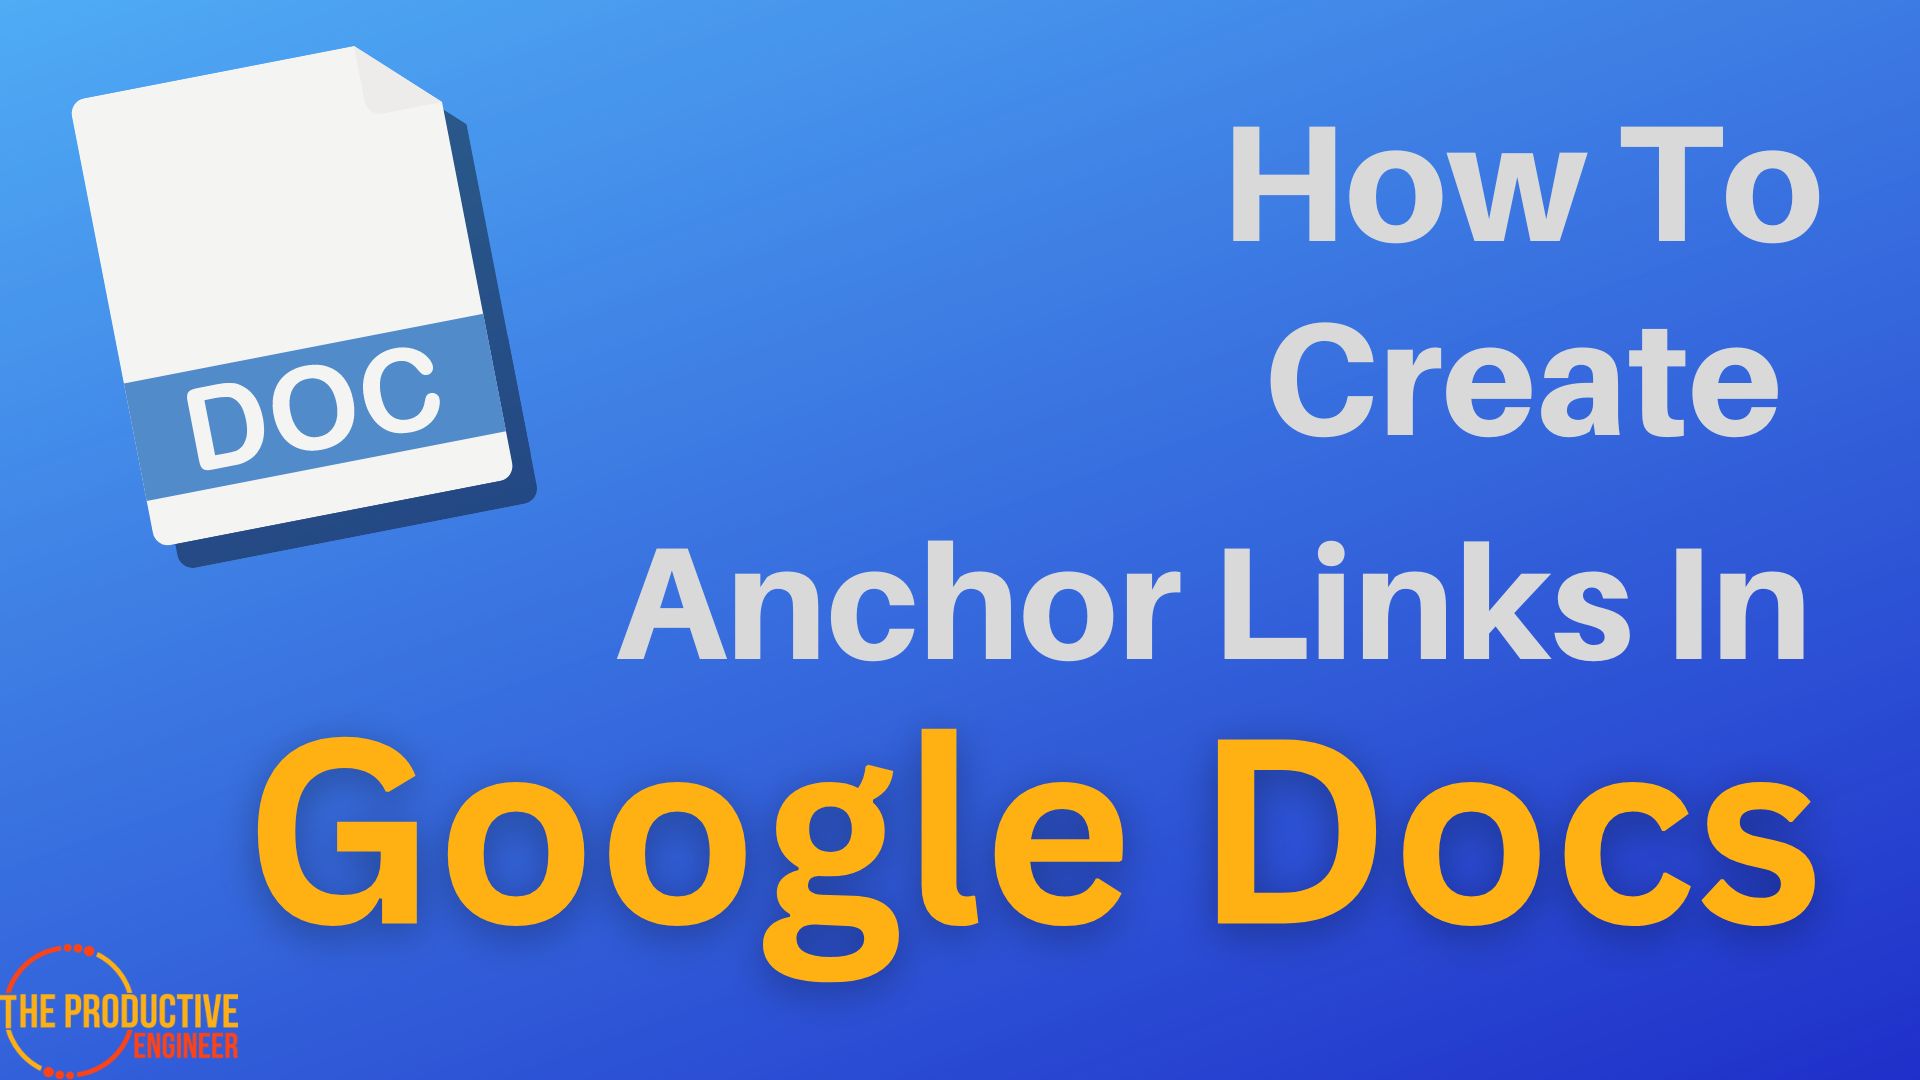 How To Create Anchor Links In Google Docs